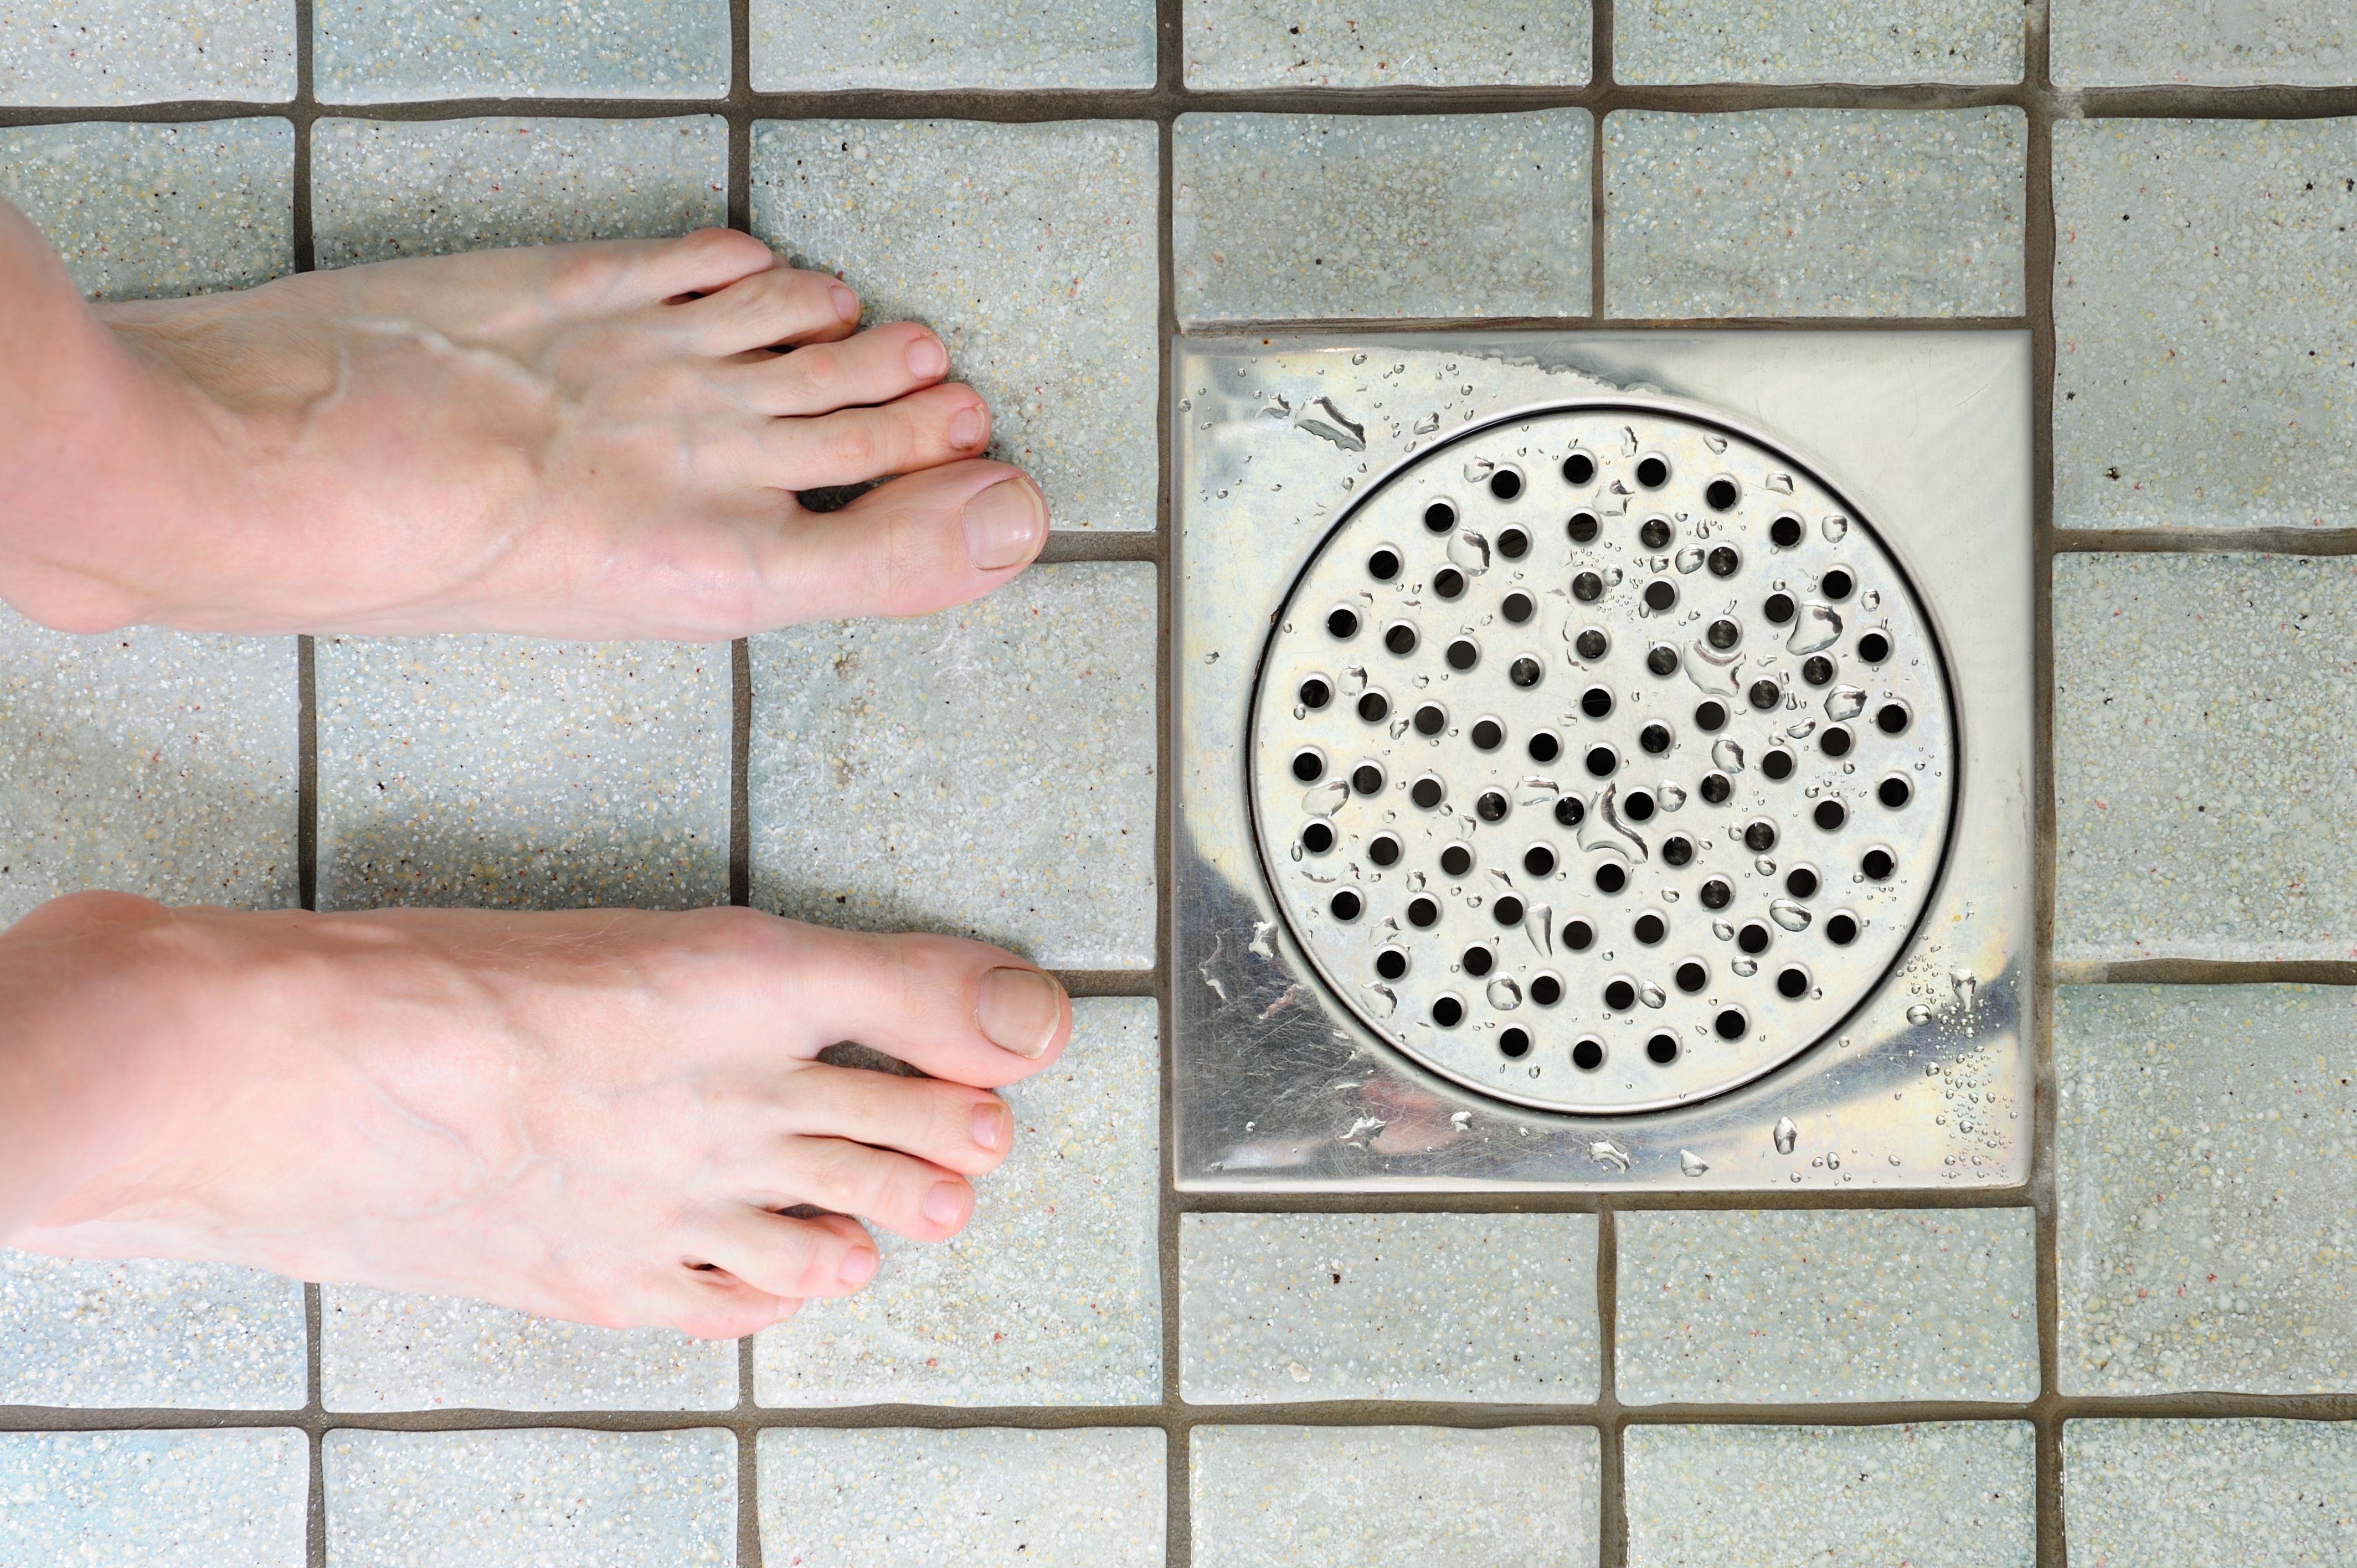 How to Unclog Shower Drain, According to Plumbers